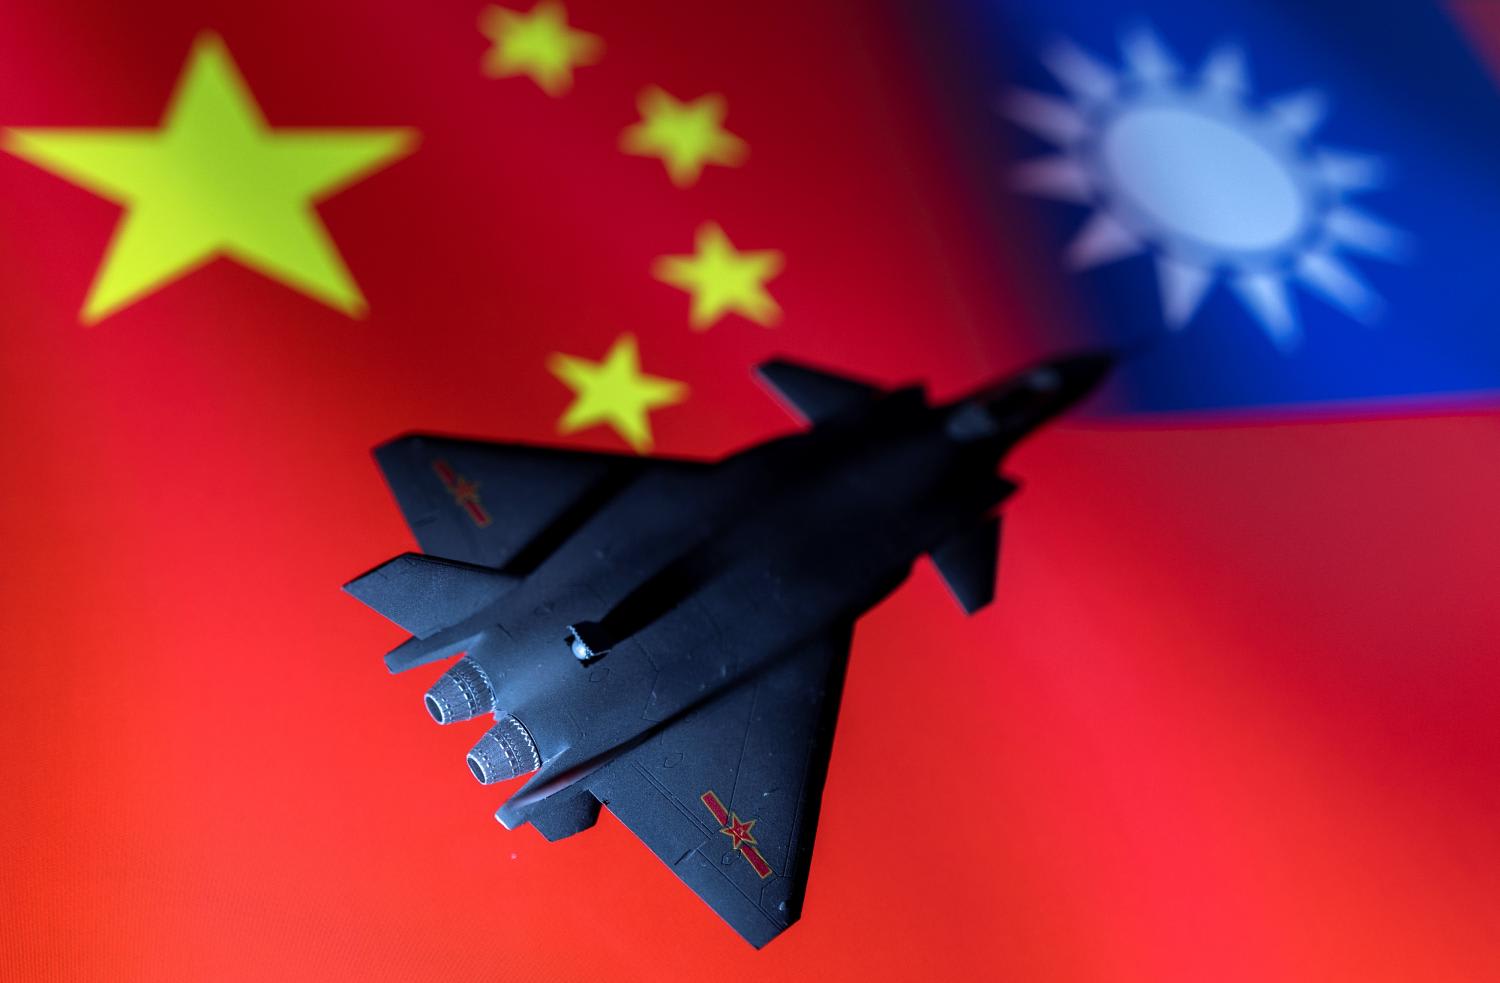 Taiwan scrambles jets to warn away Chinese planes in its air defence zone